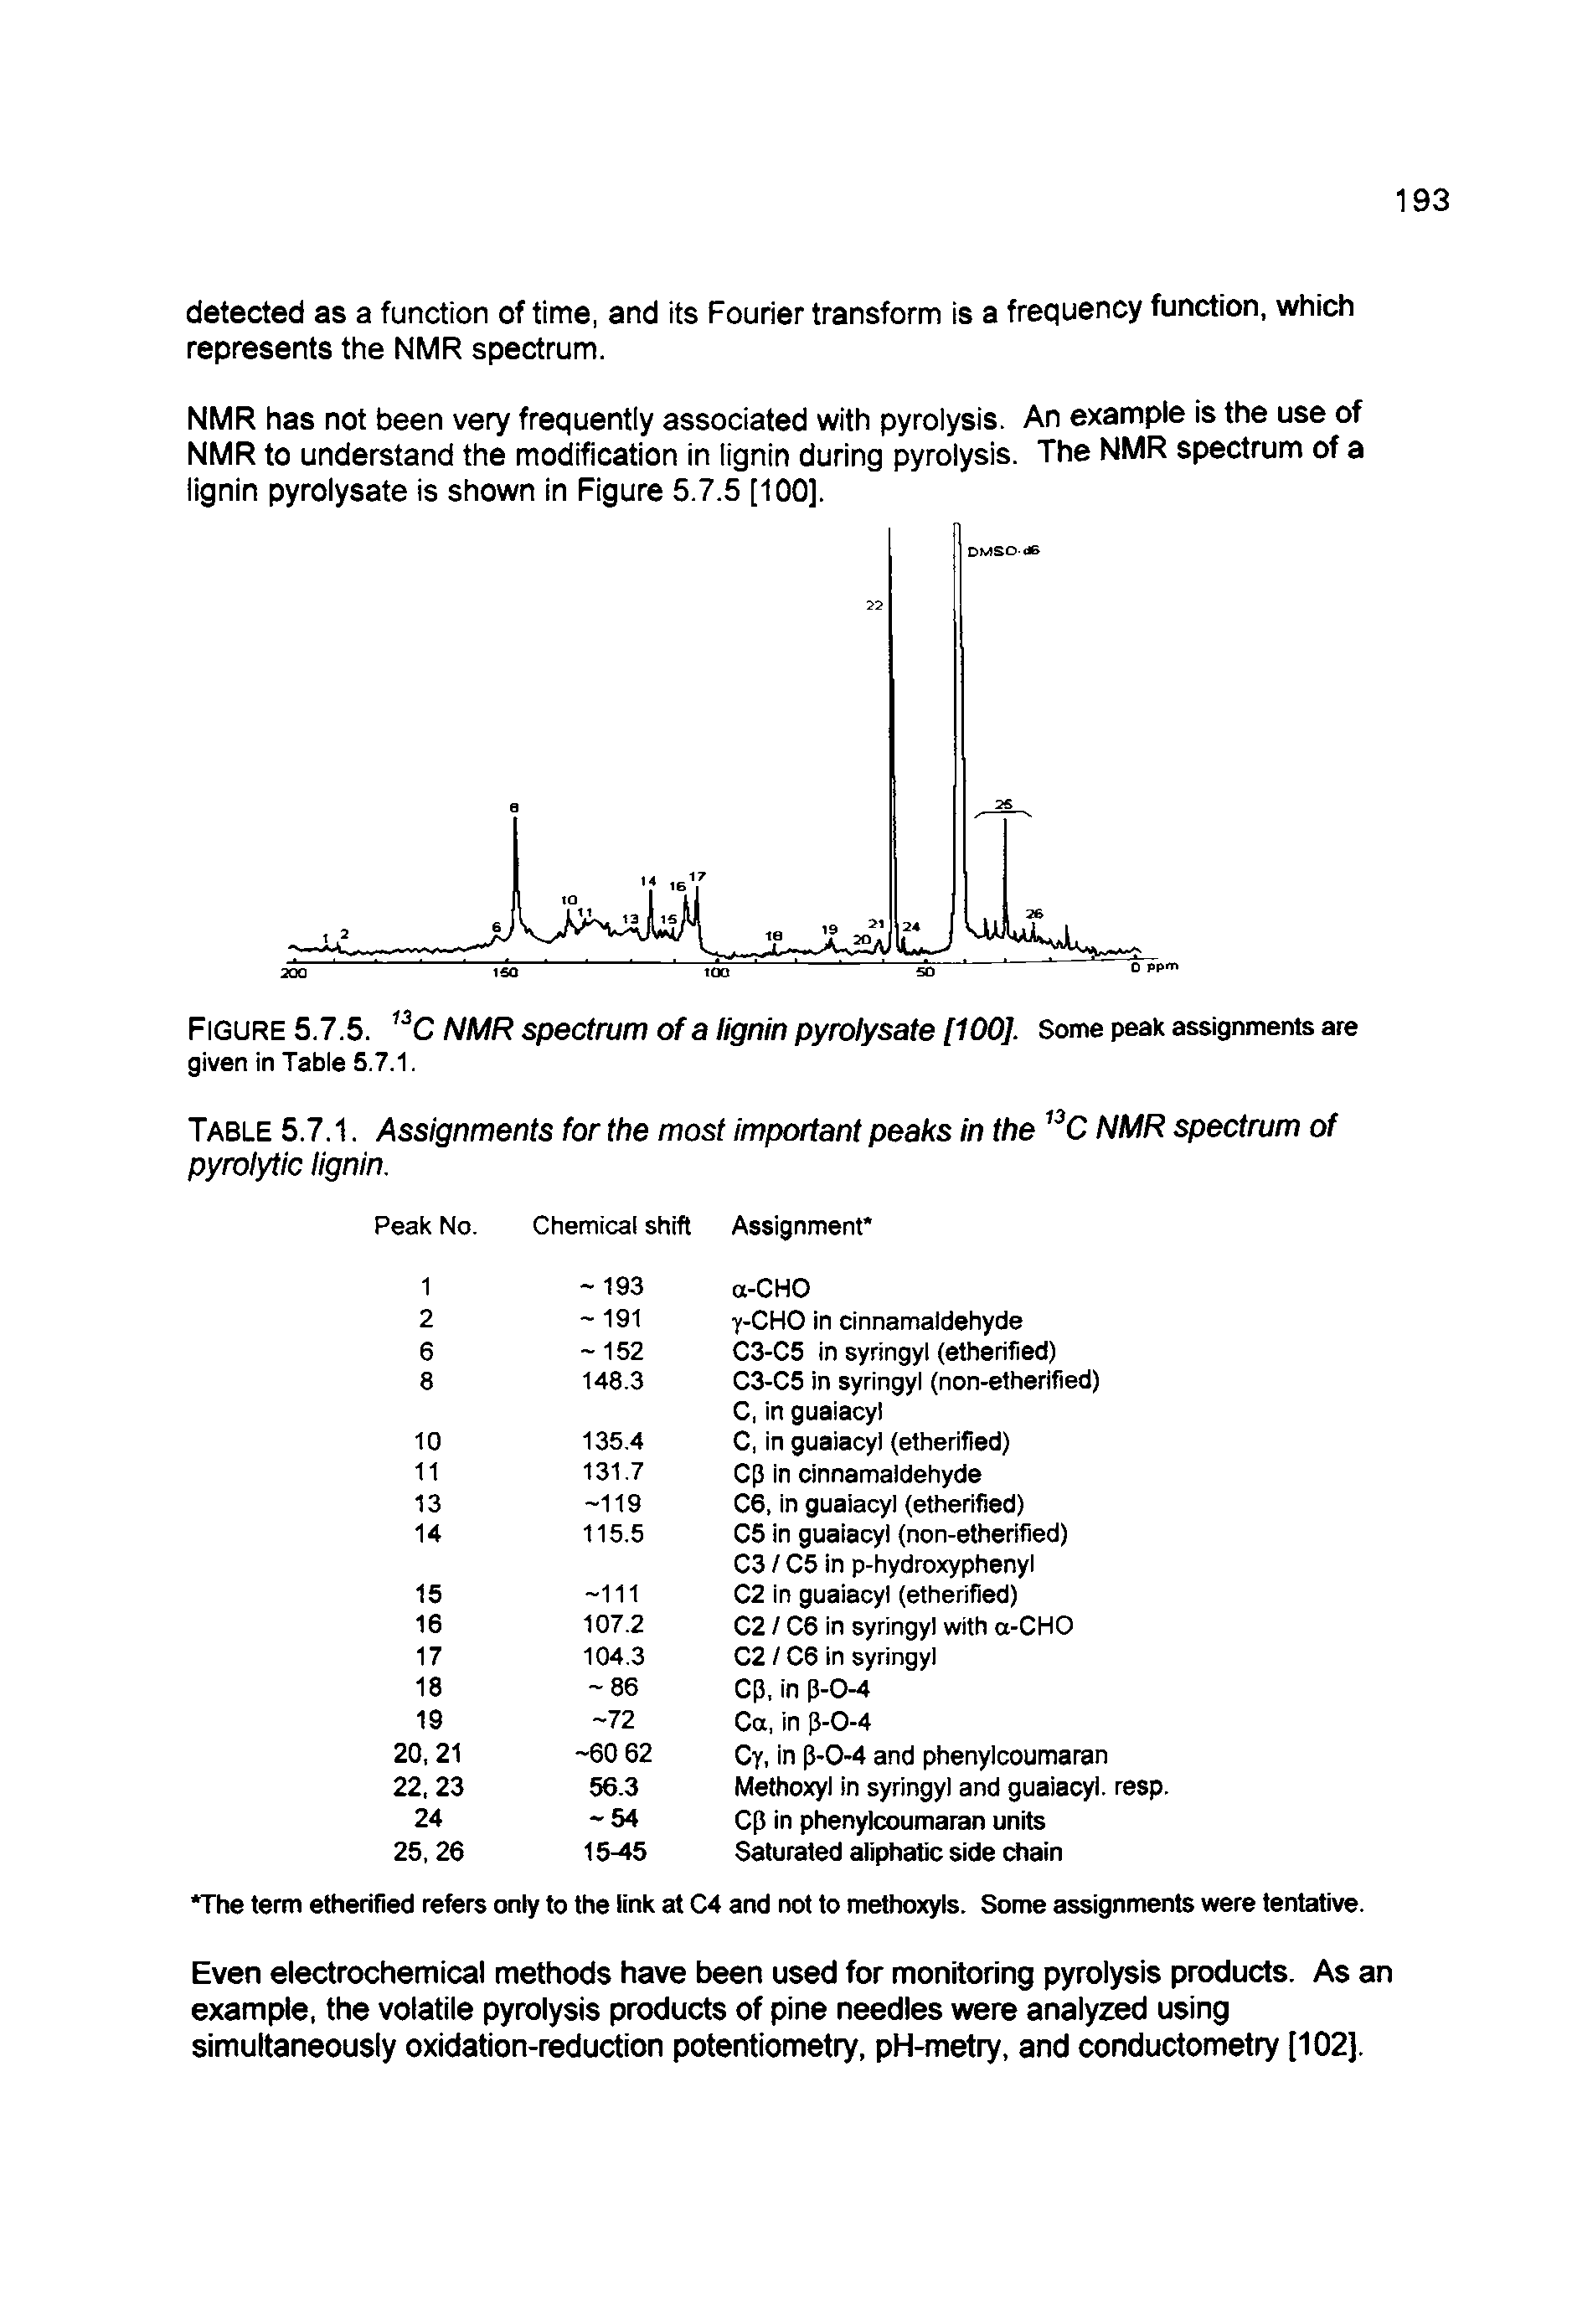 Table 5.7.1. Assignments for the most important peaks in the C NMR spectrum of pyrolytic lignin.